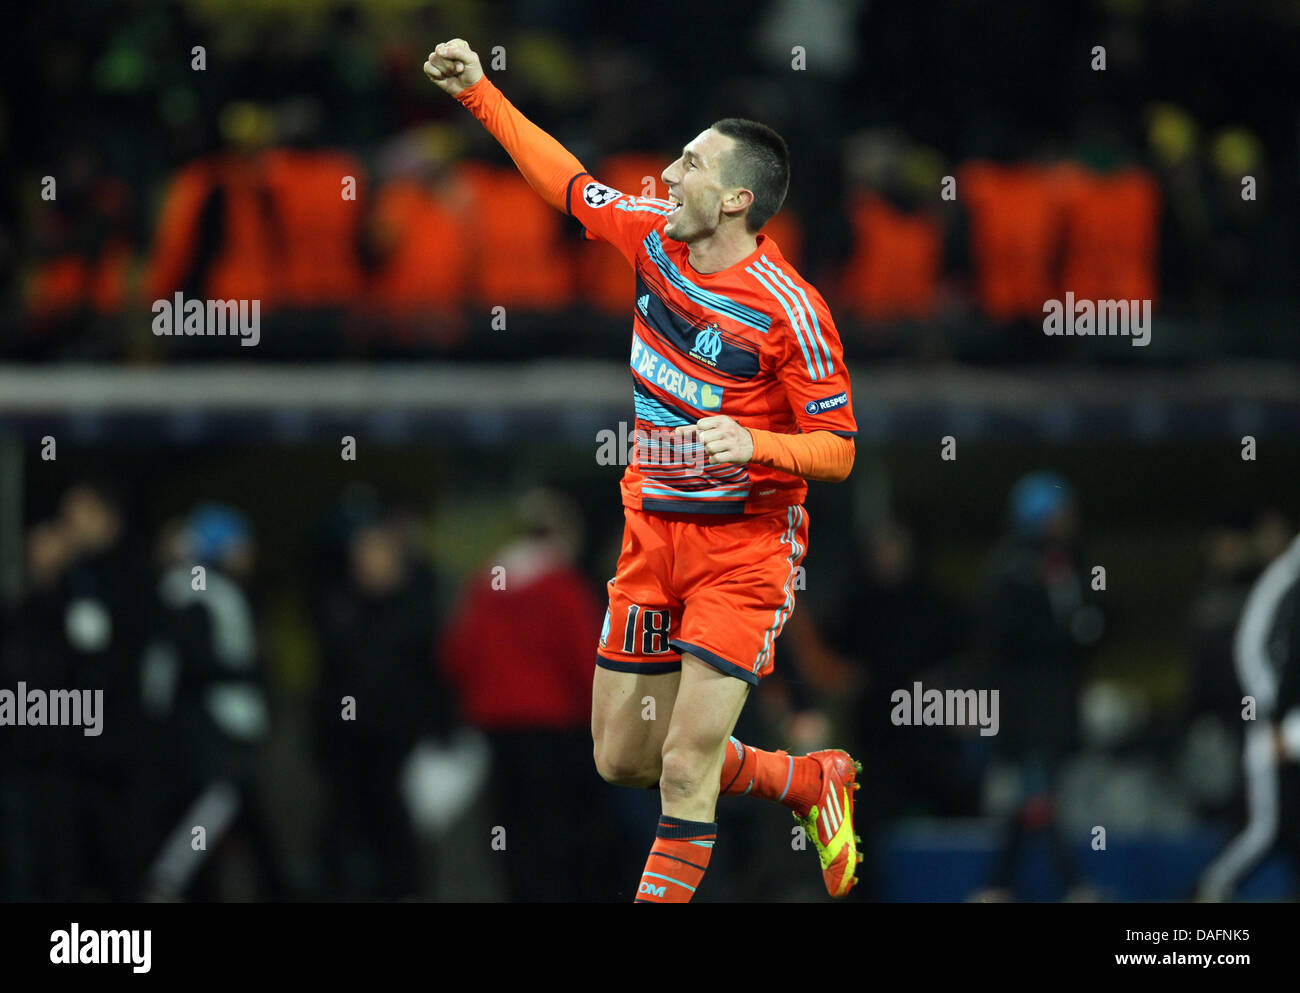 Marseille's Morgan Amalfitano celebrates the victory after the Champions League group F soccer match between Borussia Dortmund and Olympique Marseille at the BVB Arena in Dortmund, Germany 06 December 2011. Photo: Friso Gentsch dpa/lnw  +++(c) dpa - Bildfunk+++ Stock Photo